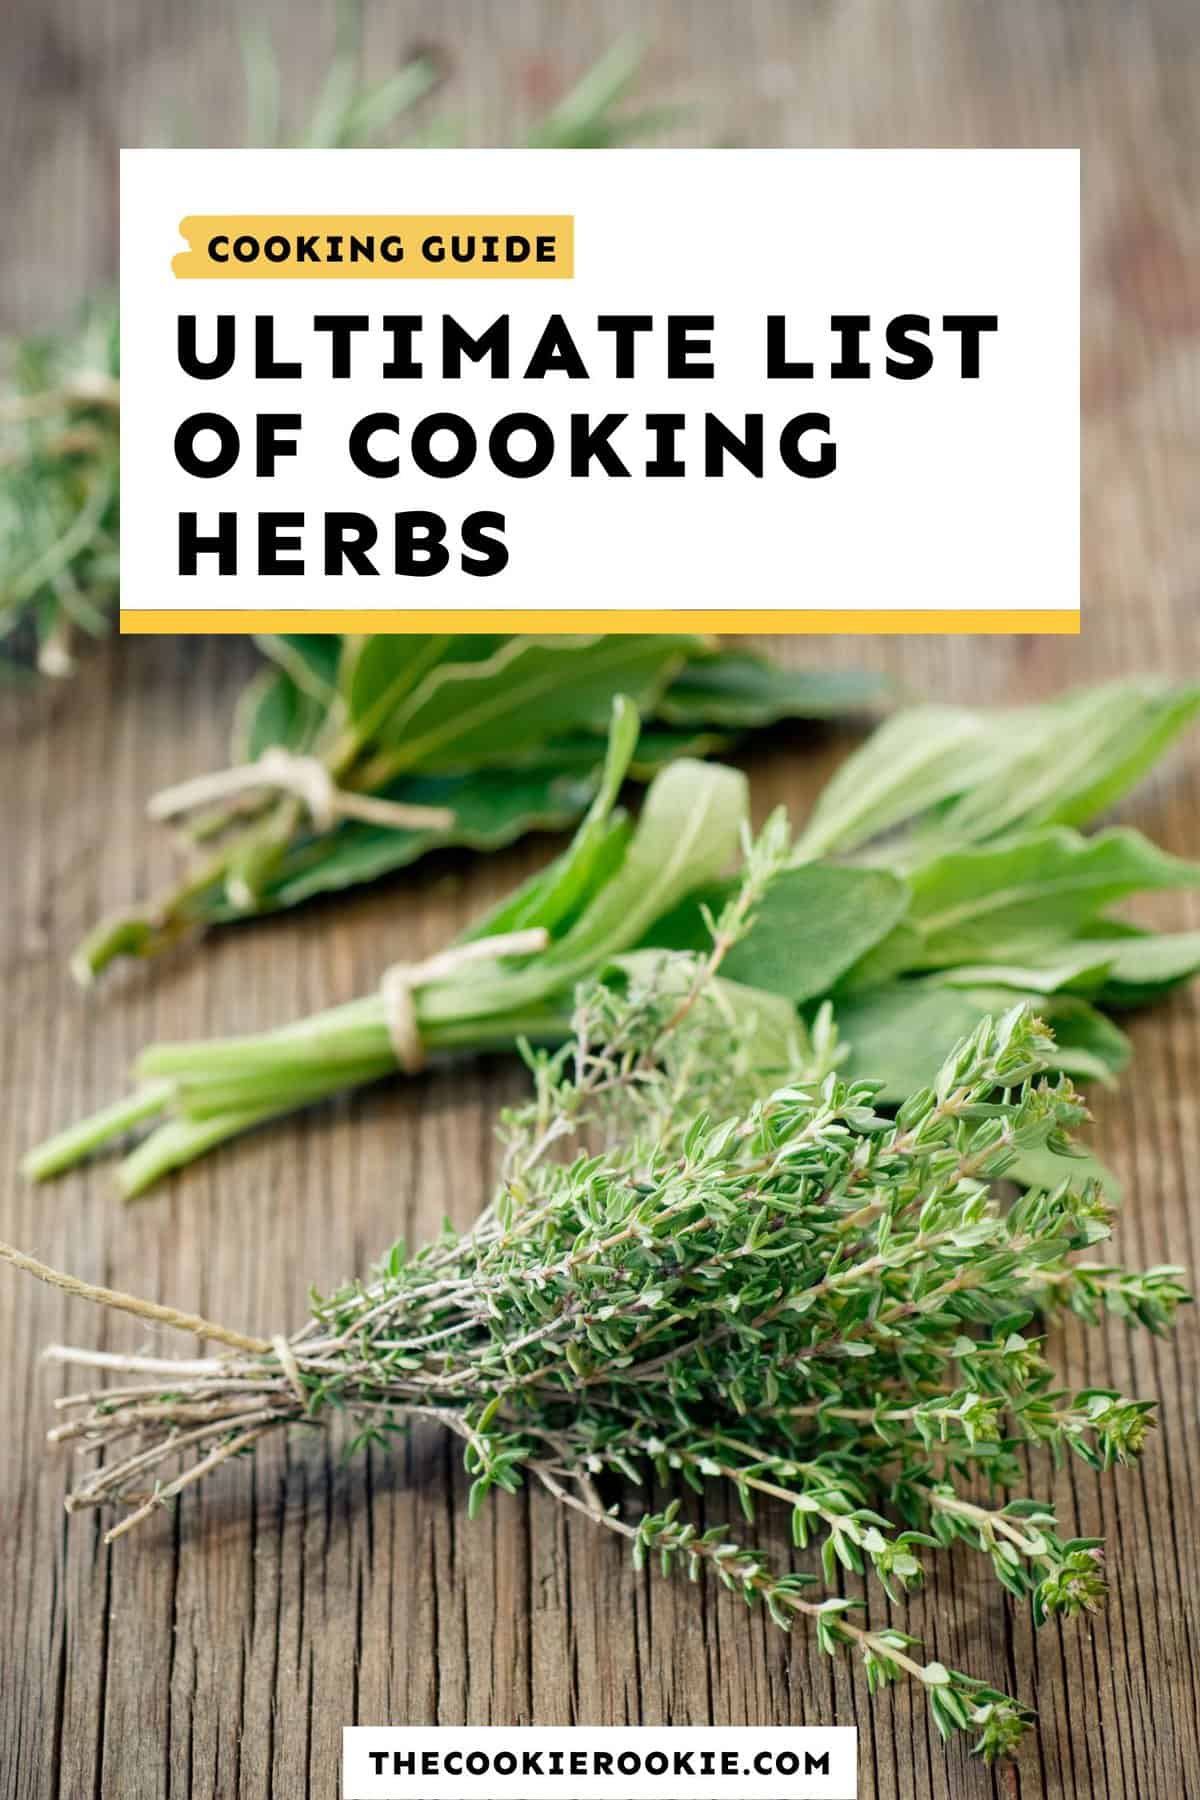 Harvest HERBS in The Forest - Traditional Medicine Processing Process, Cooking | Harvest Life